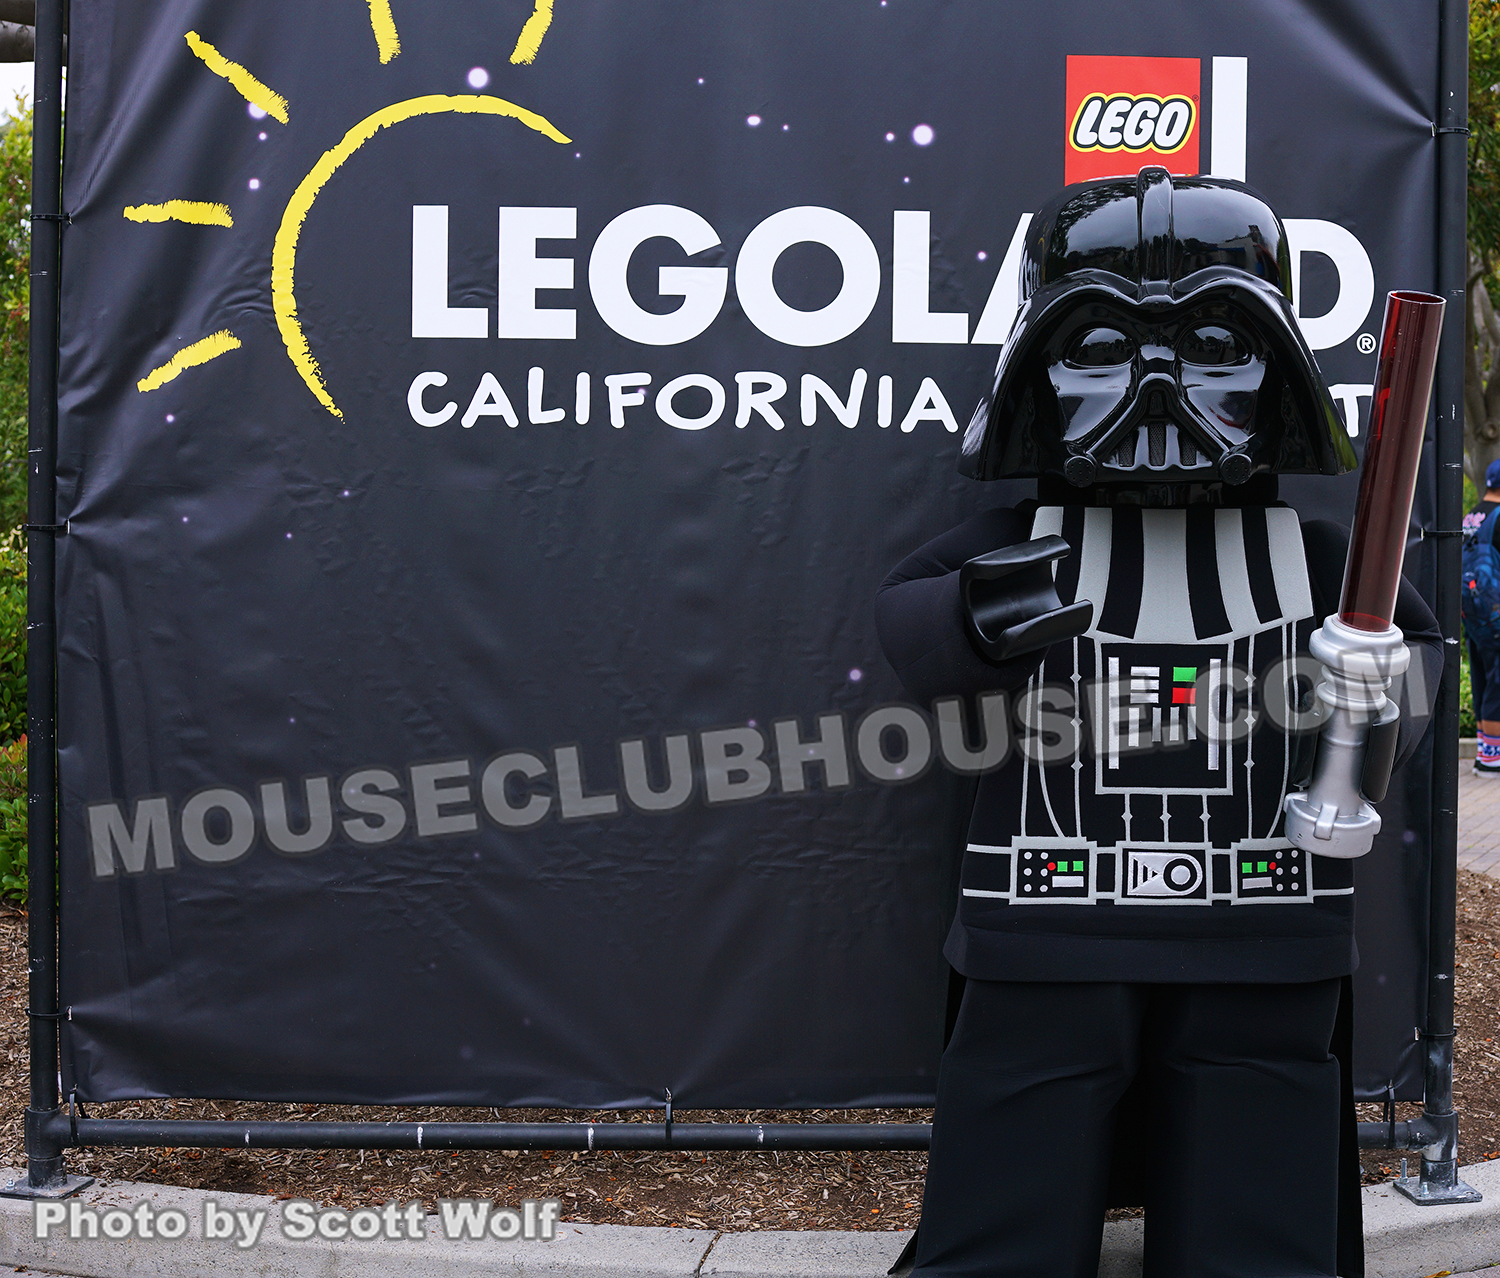 Come to the "brick" side - A LEGO version of Darth Vader